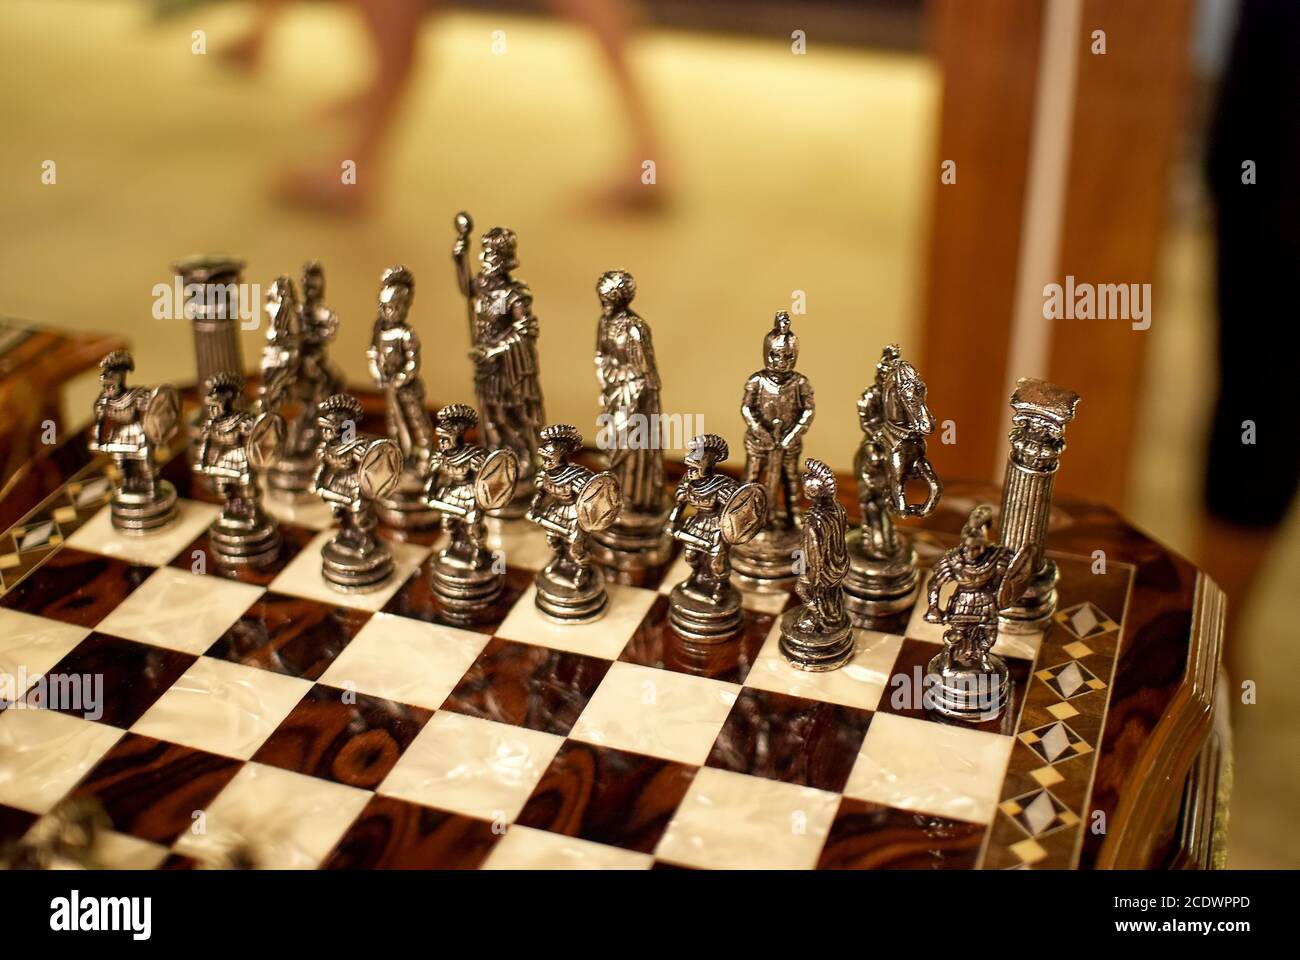 Beautiful chess set for sale on Grand Bazaar, Turkey. Made of wood and metallic materials. Chessboard, classic game, strategic, strategy, turkish Stock Photo